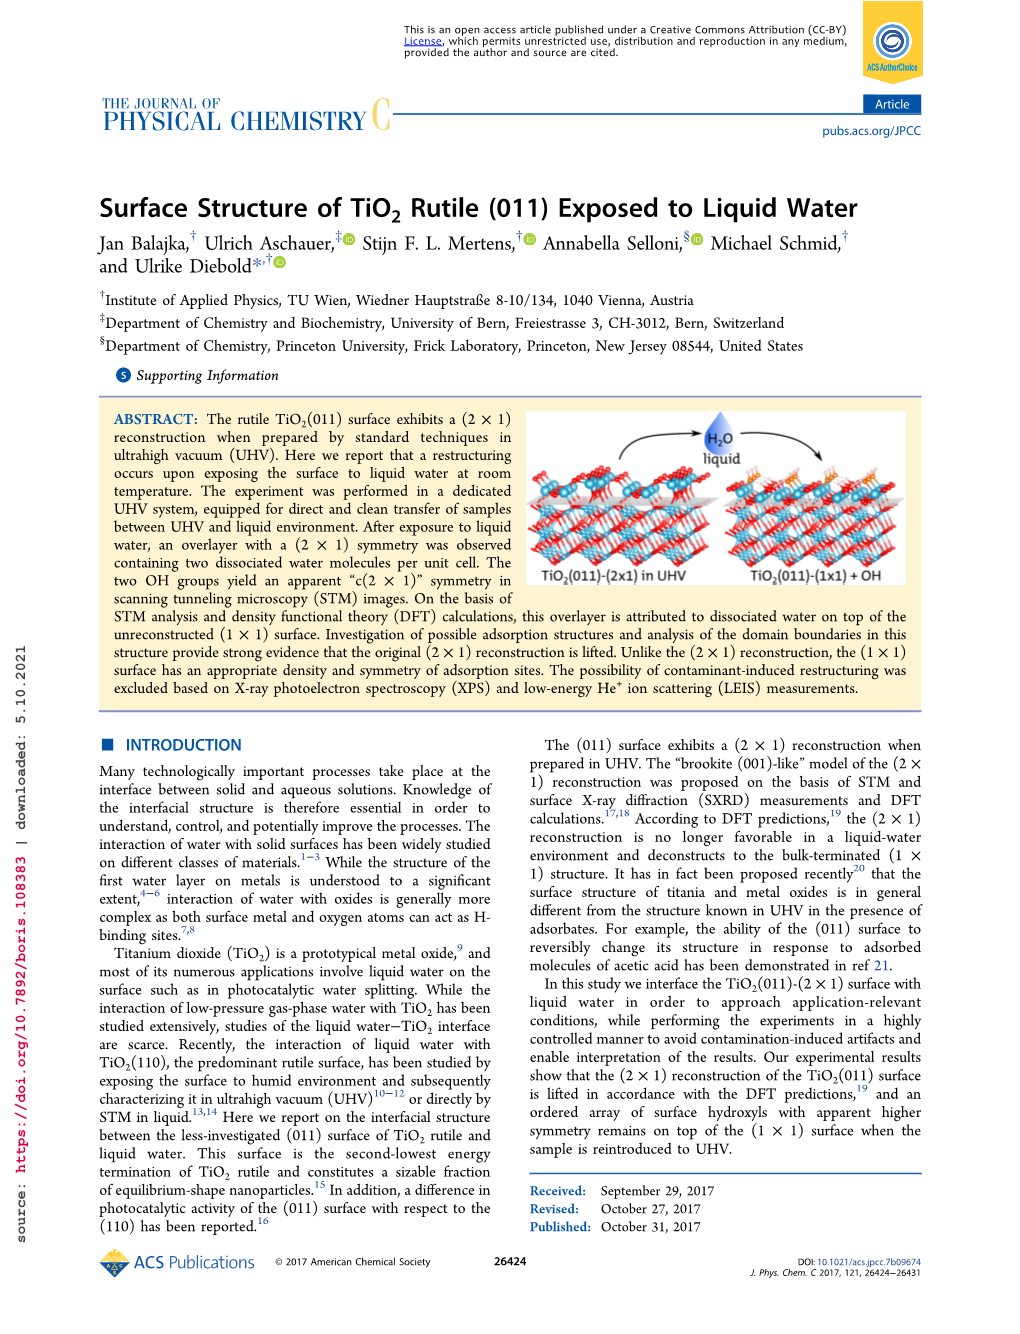 Surface Structure of Tio2 Rutile (011) Exposed to Liquid Water